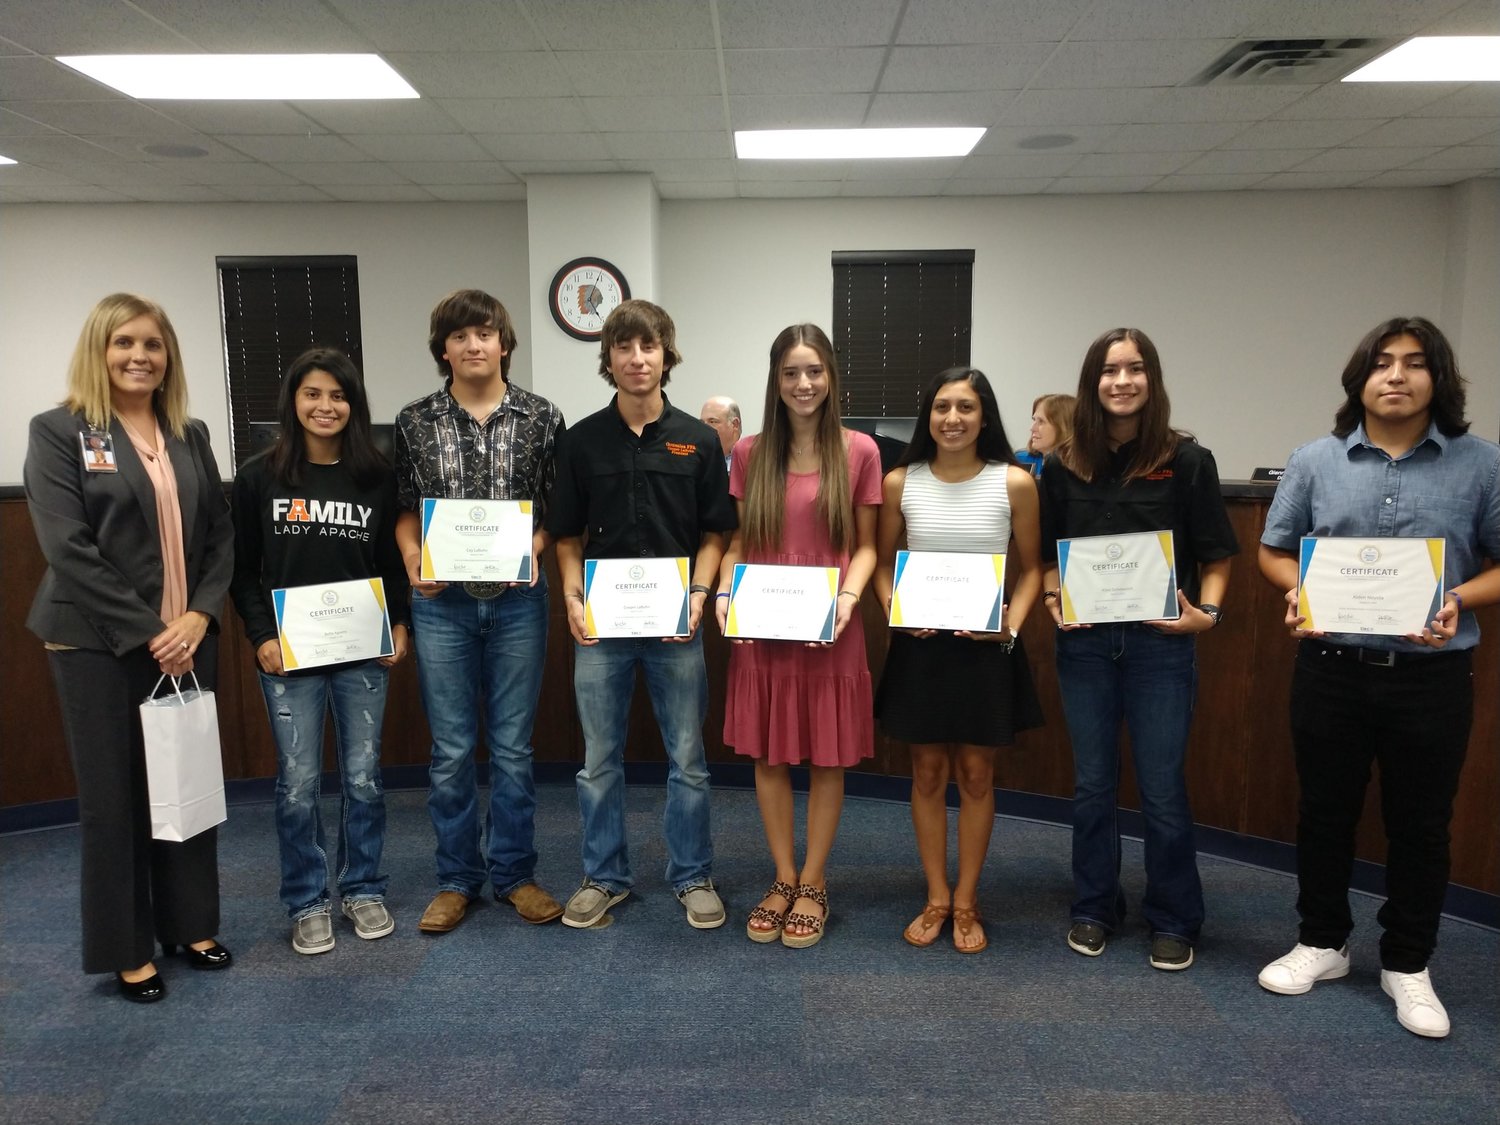 Eleven Gonzales High School students receives special recognition from the school district for their participation in the GHS Virtual Exchange Project: Mishima, Japan in Monday, Aug. 29 school board meeting,: Left to Right: GISD Student Servces Robin Trojcak and GHS students, Bella Aguero, Coy LaBuhn, Cooper LaBuhn, Ainsley Holub, Yesenia Melchor, Kilee Schwausch and Aiden Noyola. NOT PICTURED: Kayleigh Fridrich, Emily Hull, Carlee Ramos and Dakota Schmidt.